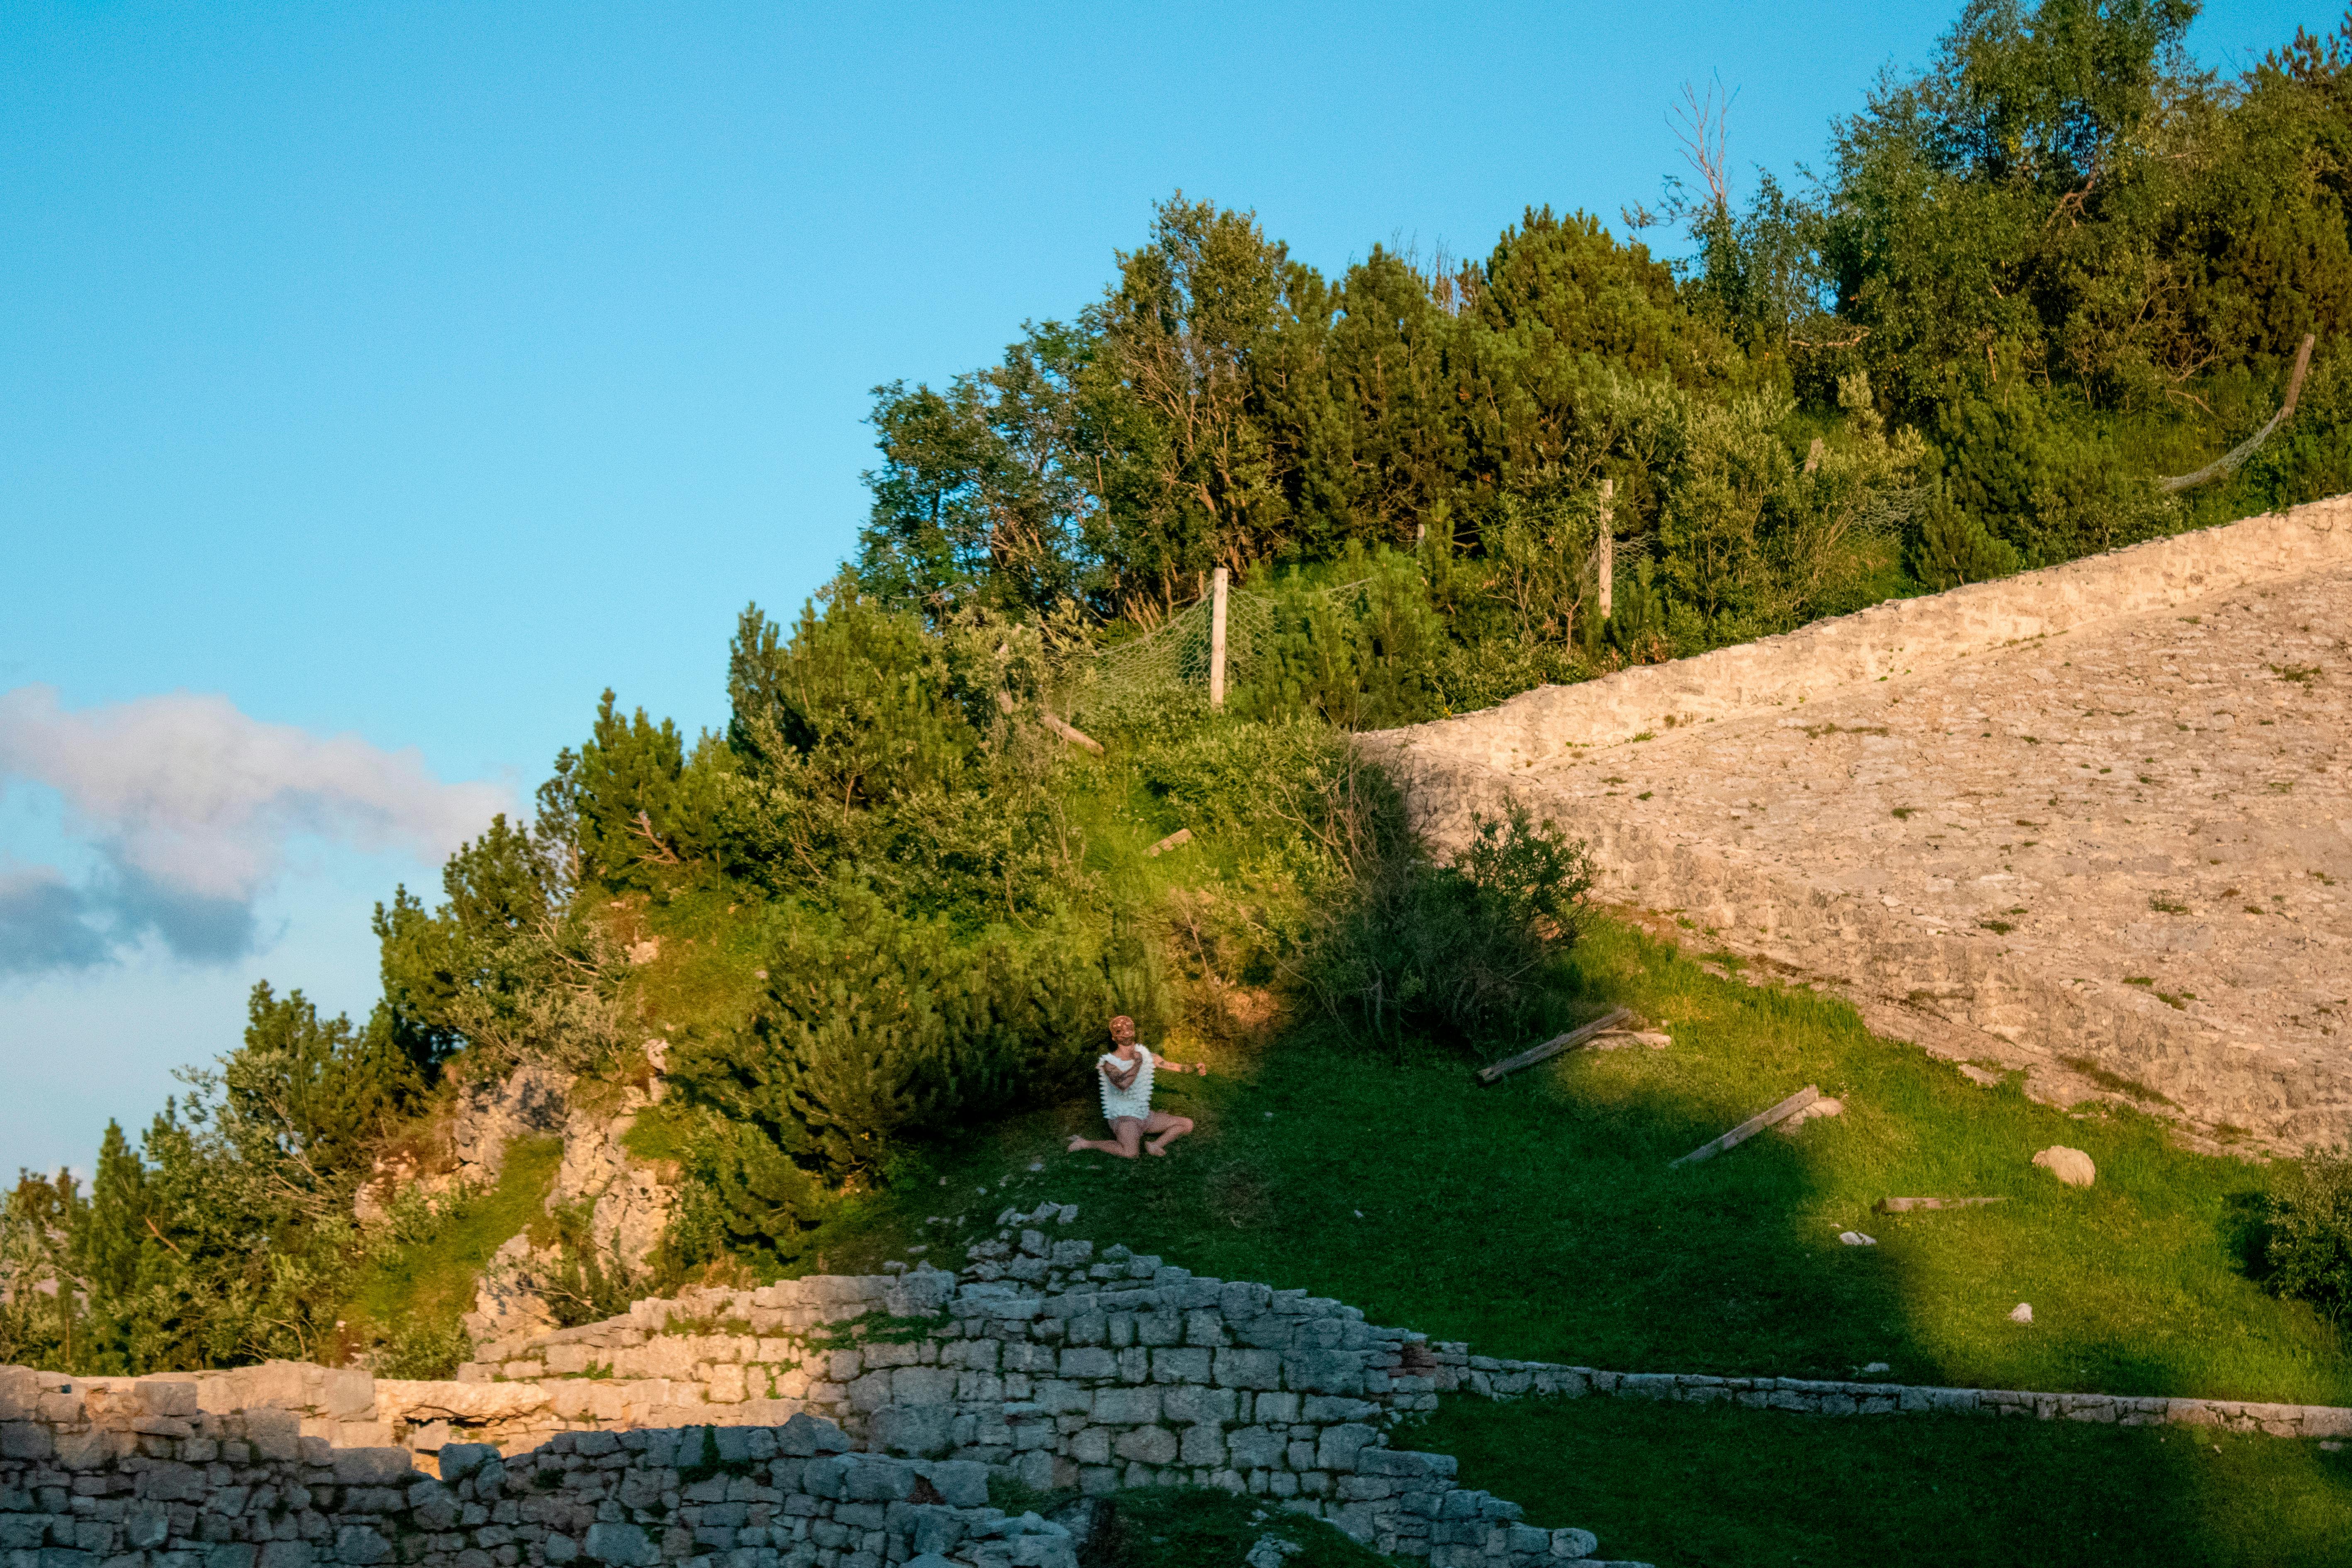 You can see the slope of a hill on a sunny day. Stone ruins are glimpsed. In the landscape, a dancer appears standing out thanks to his white dress.